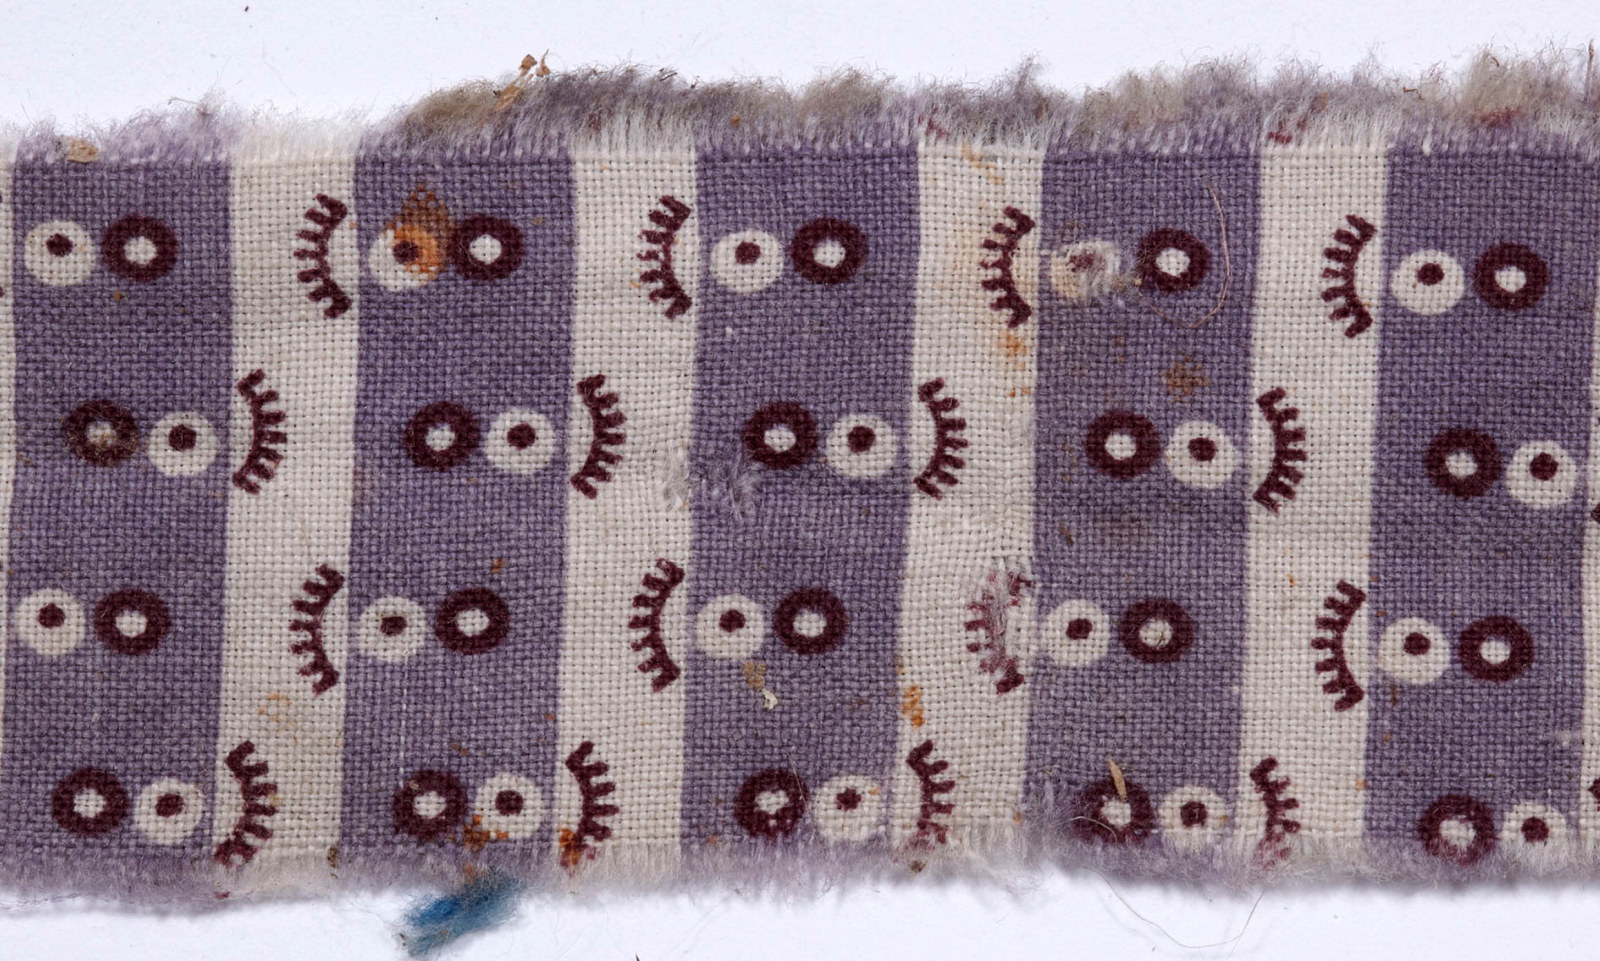 Fragment of purple patterned cloth.